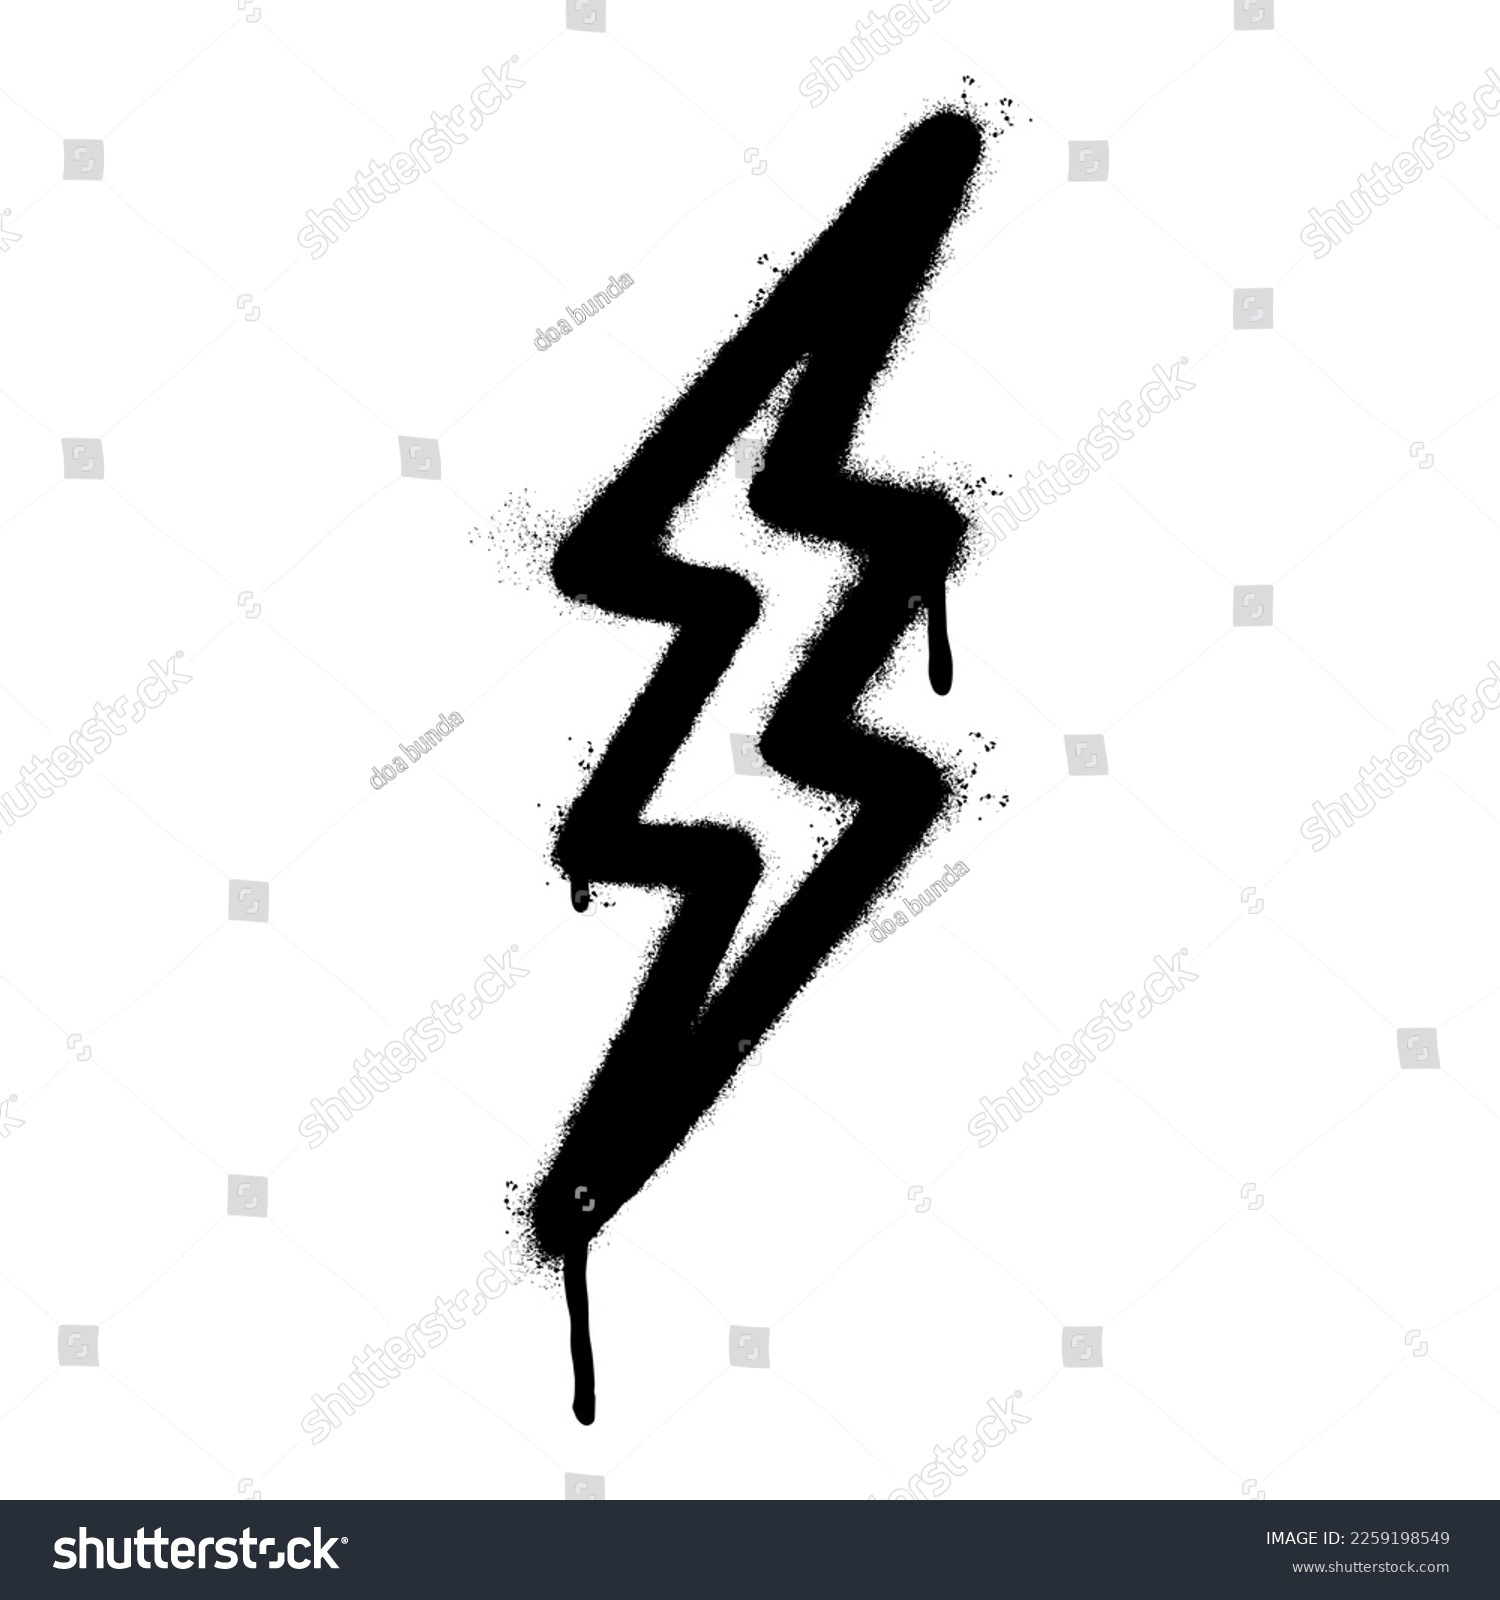 SVG of Spray Painted Graffiti electric lightning bolt symbol Sprayed isolated with a white background. graffiti electric lightning bolt icon with over spray in black over white.  svg